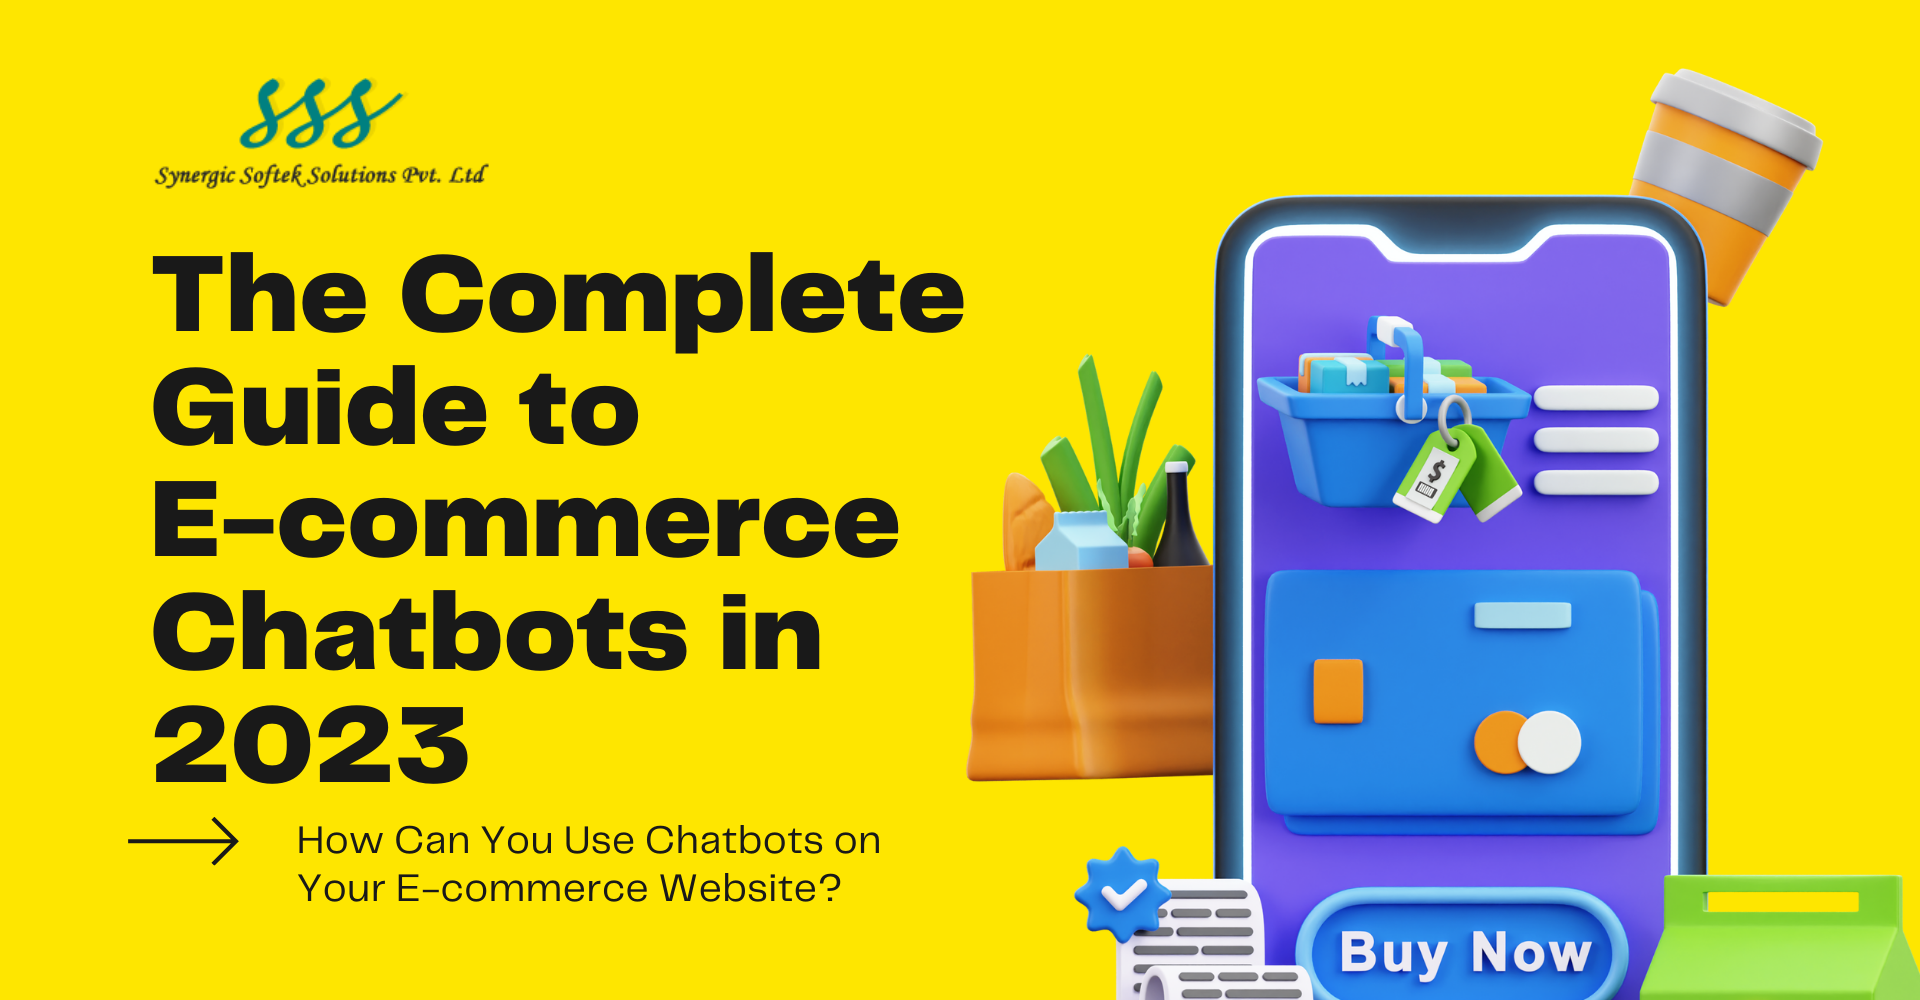 The Complete Guide to E-commerce Chatbots